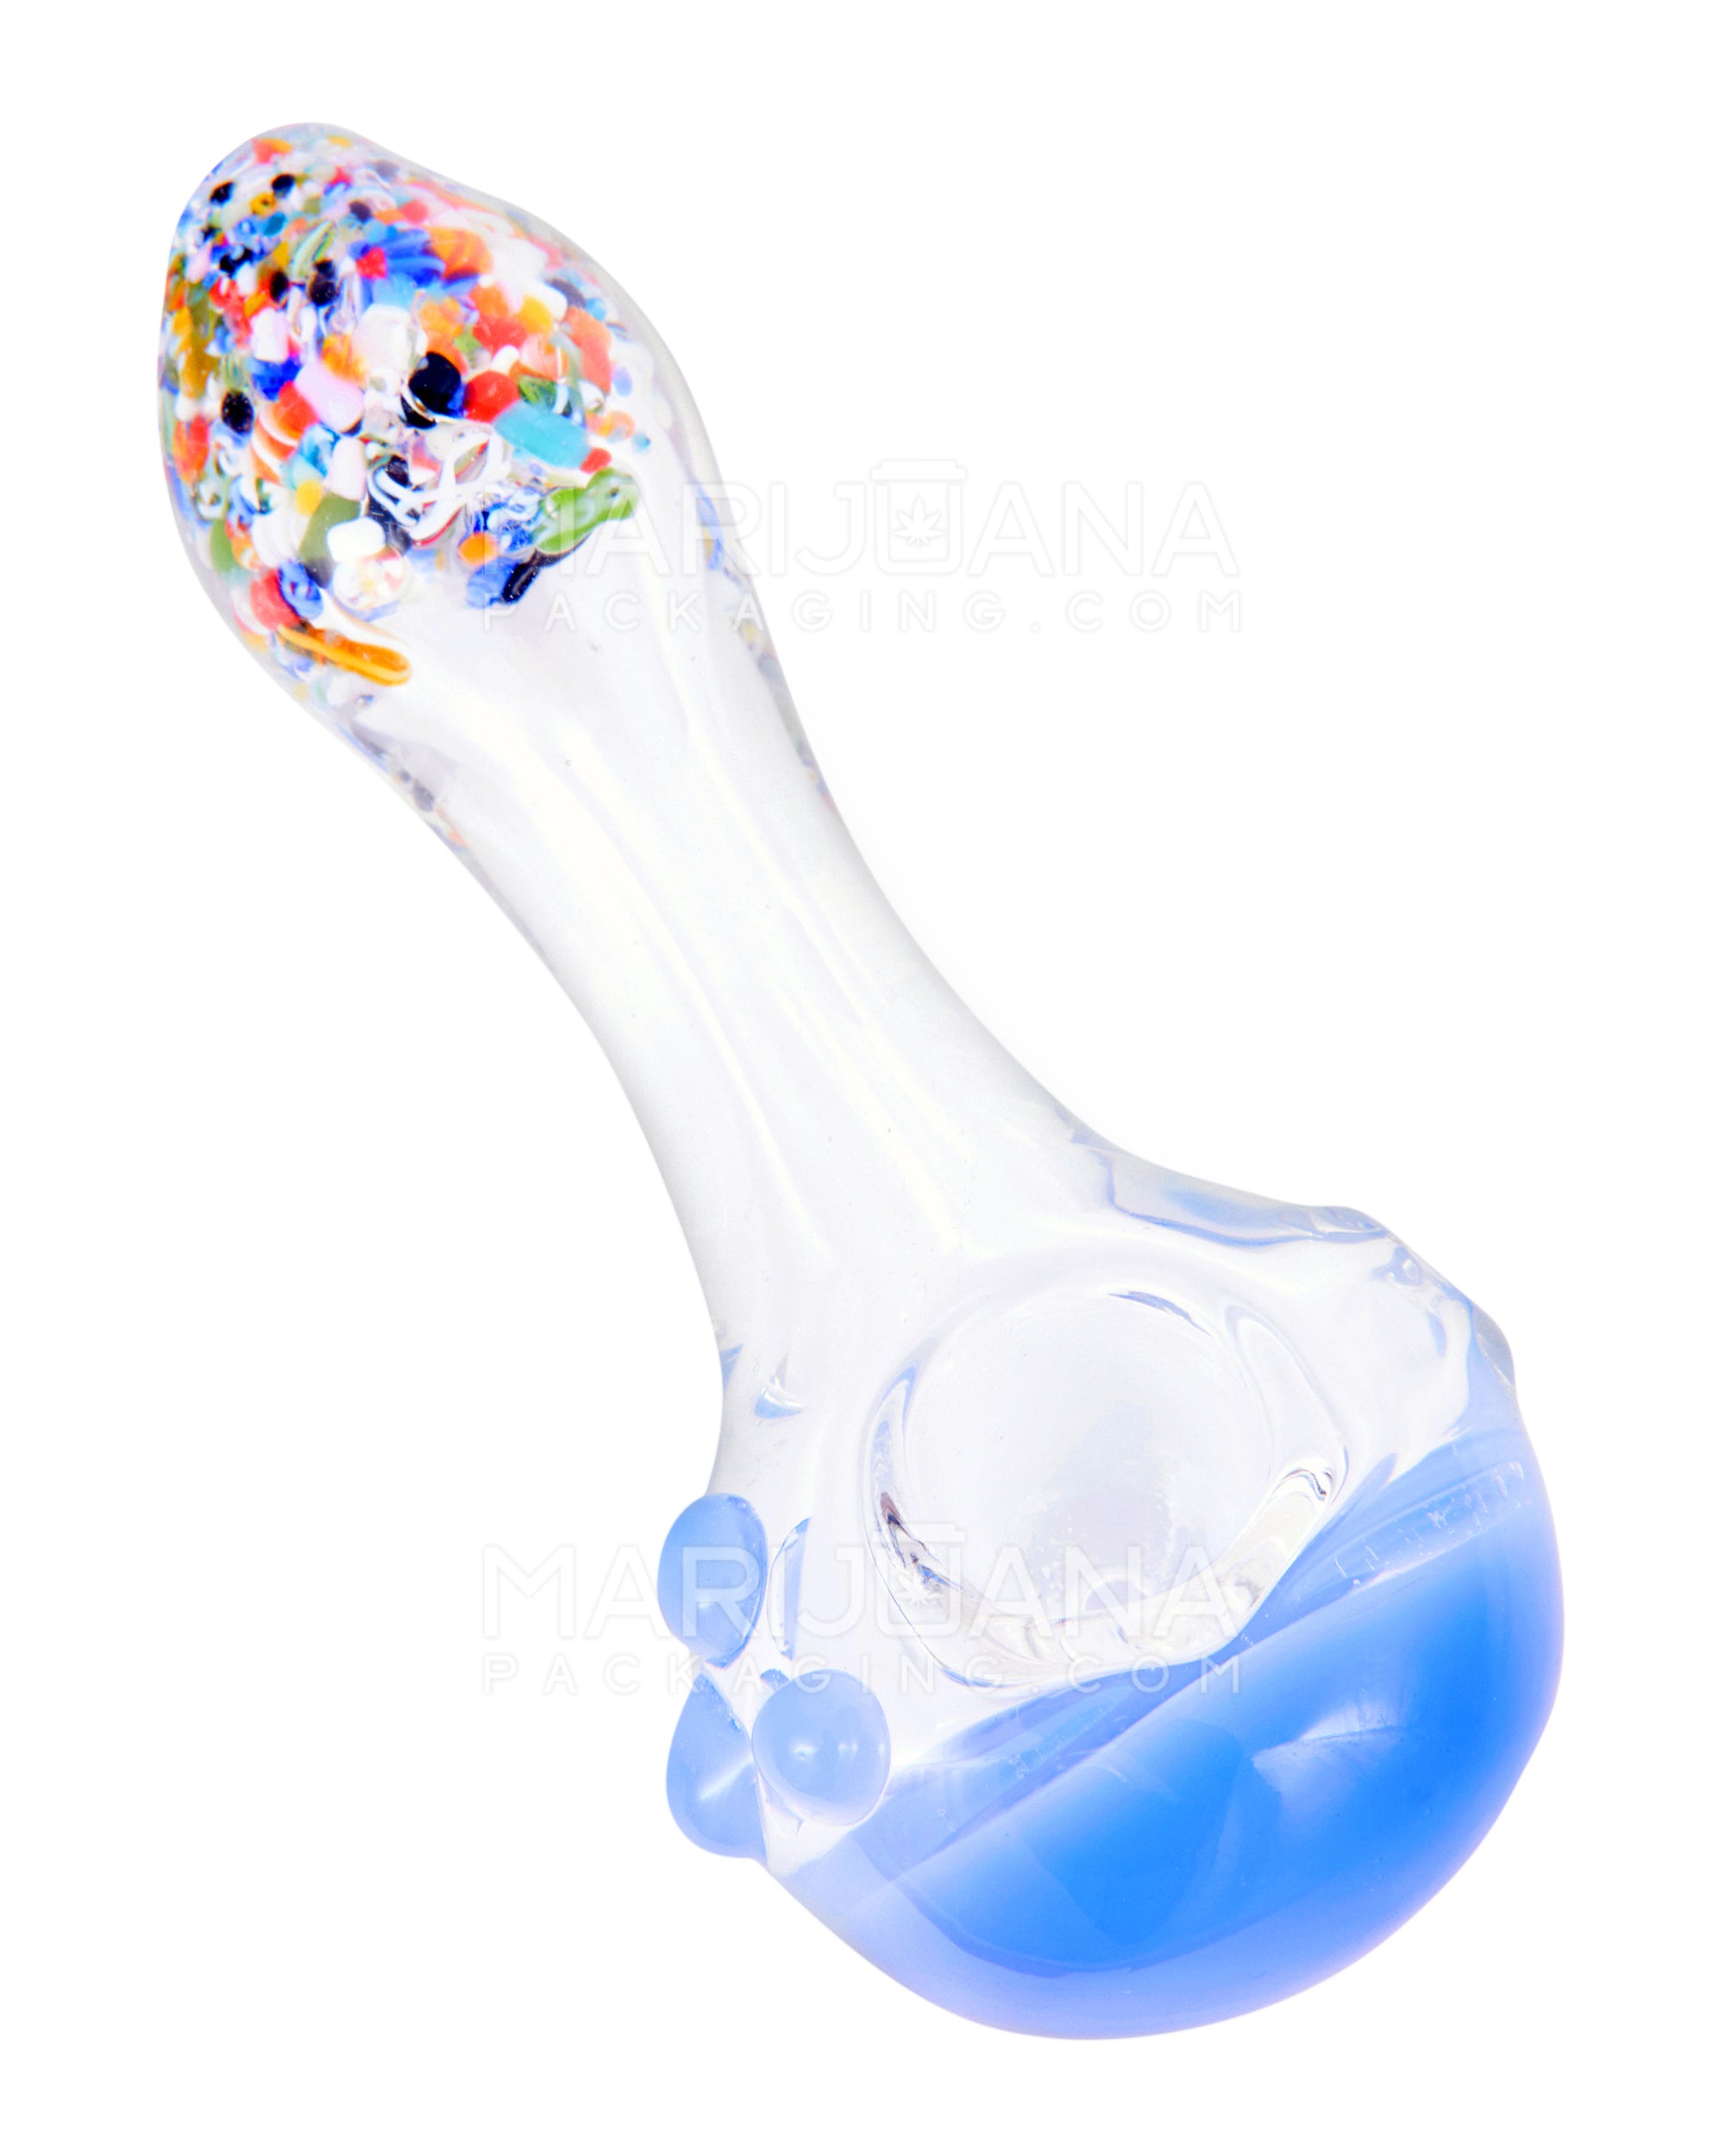 Fritted Mouthpiece Spoon Hand Pipe w/ Colored Head | 5in Long - Glass - Assorted - 1